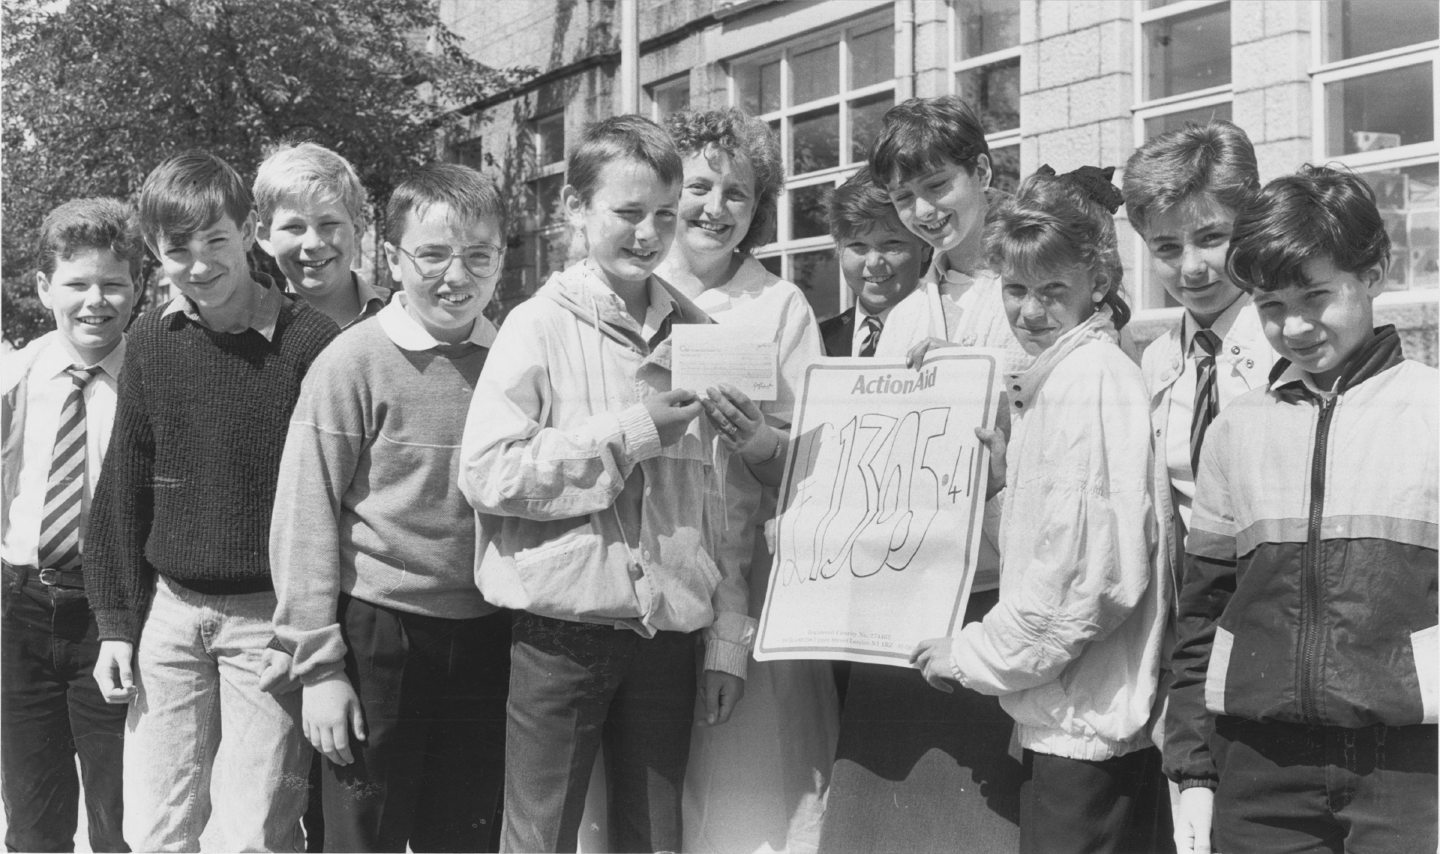 Young pupils holding a cheque and poster